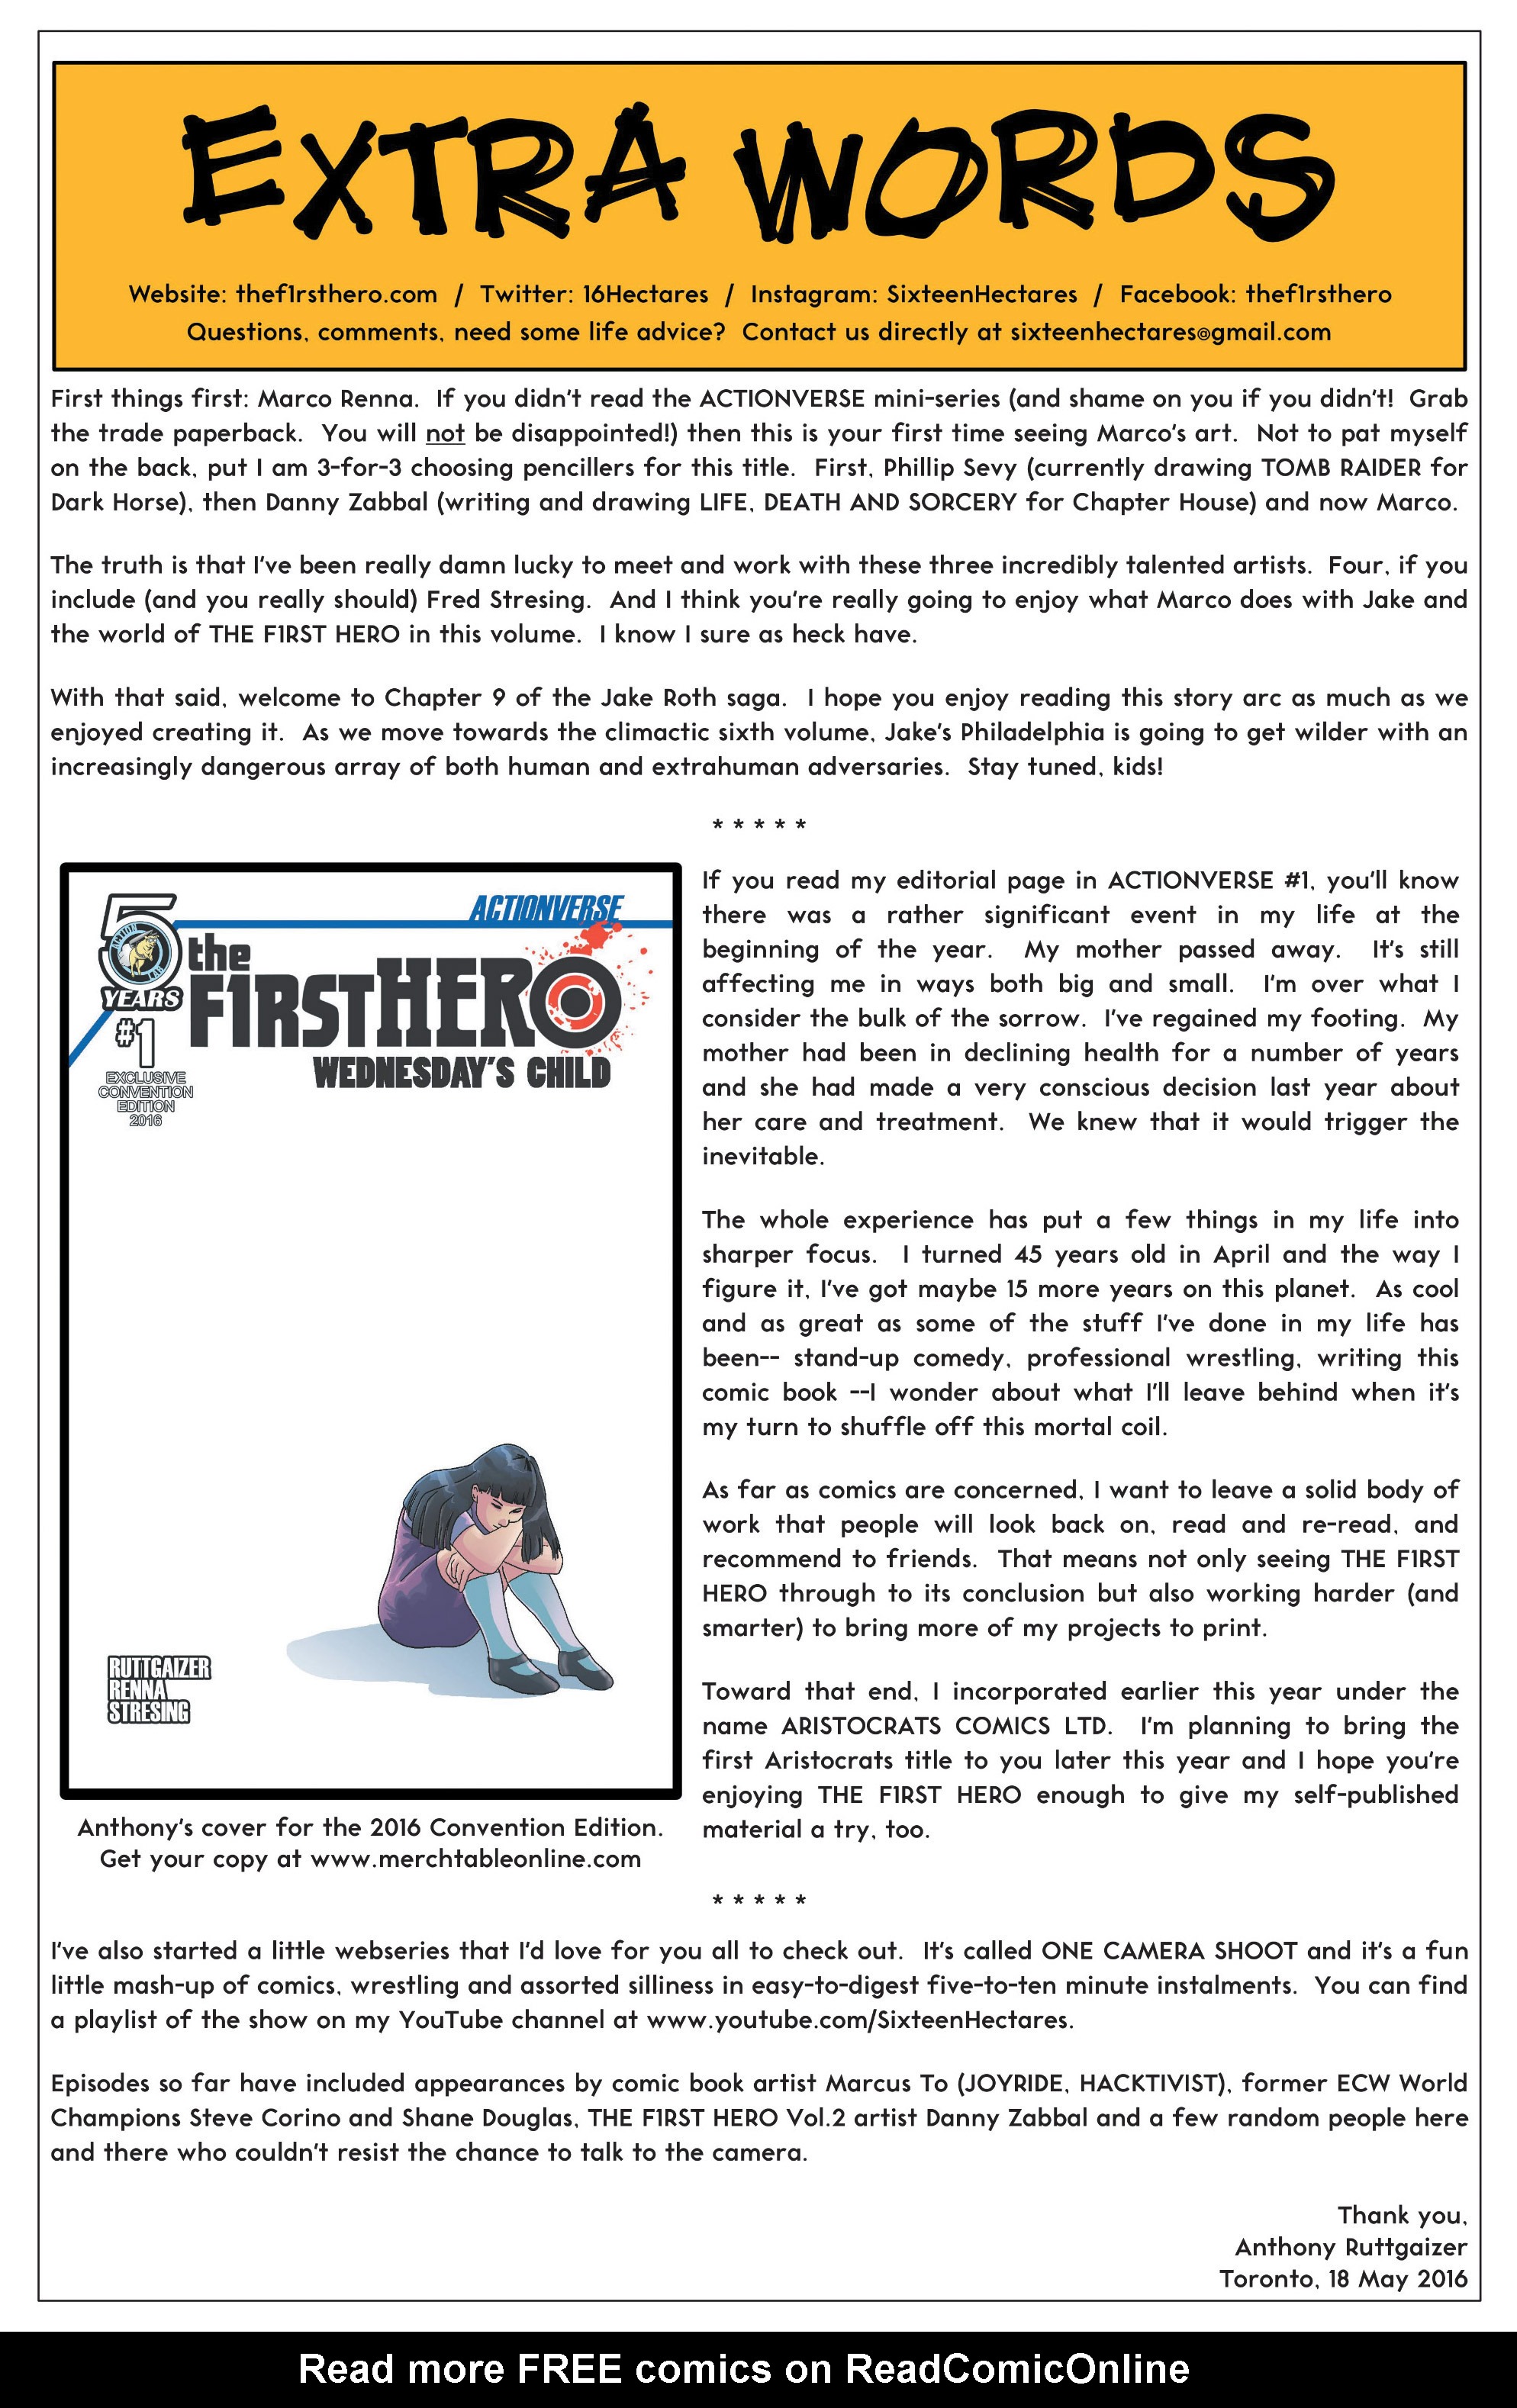 Read online The F1rst Hero: Wednesday's Child comic -  Issue #1 - 25